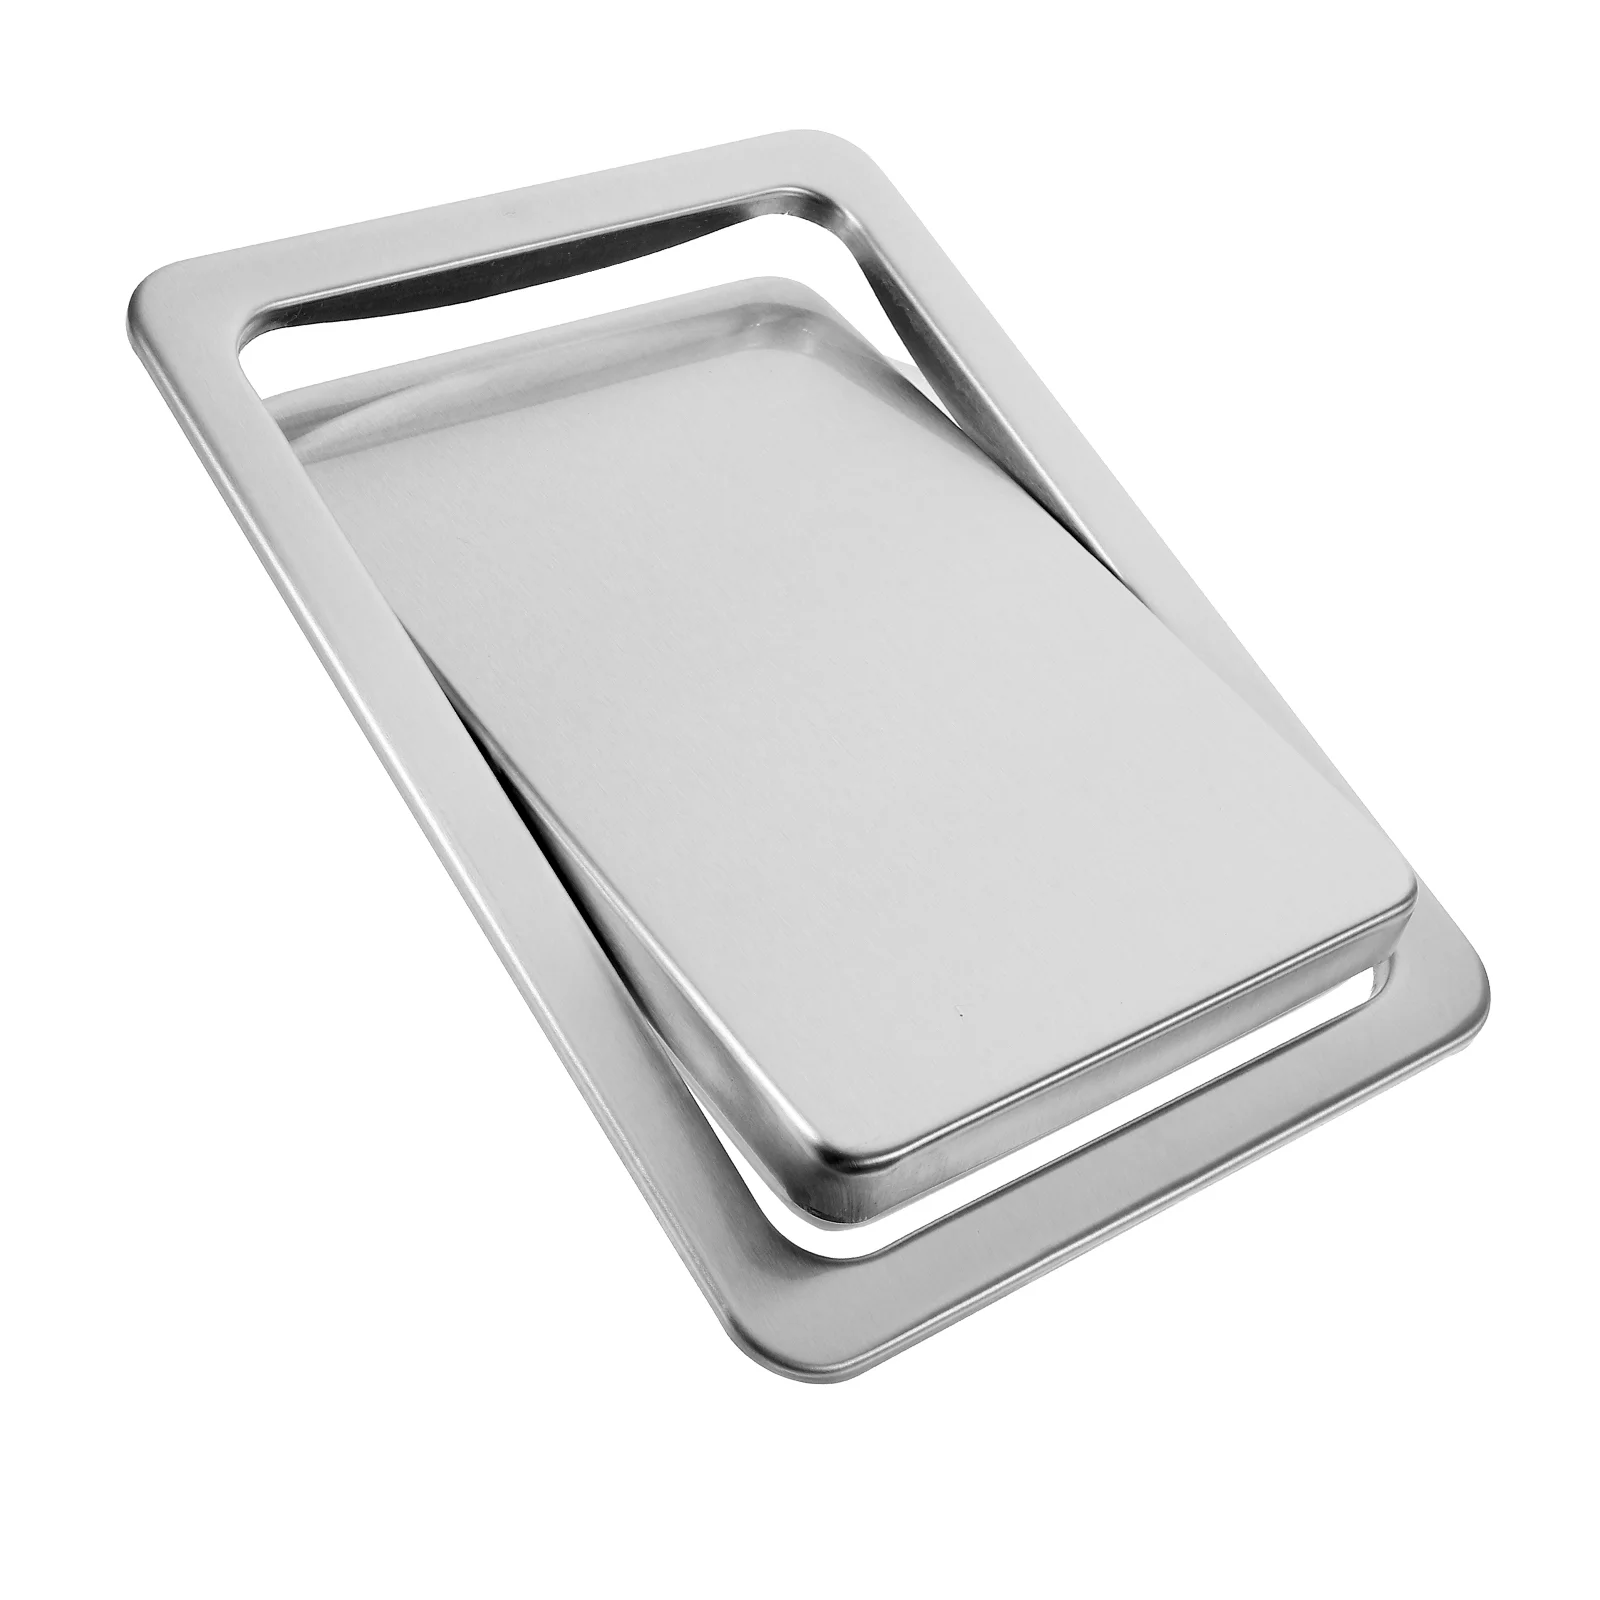 

Trash Bin Swing Flap Lid Embedded Type Stainless Steel Flush Built-in Balance Swing Flap Lid for Kitchen Removable under